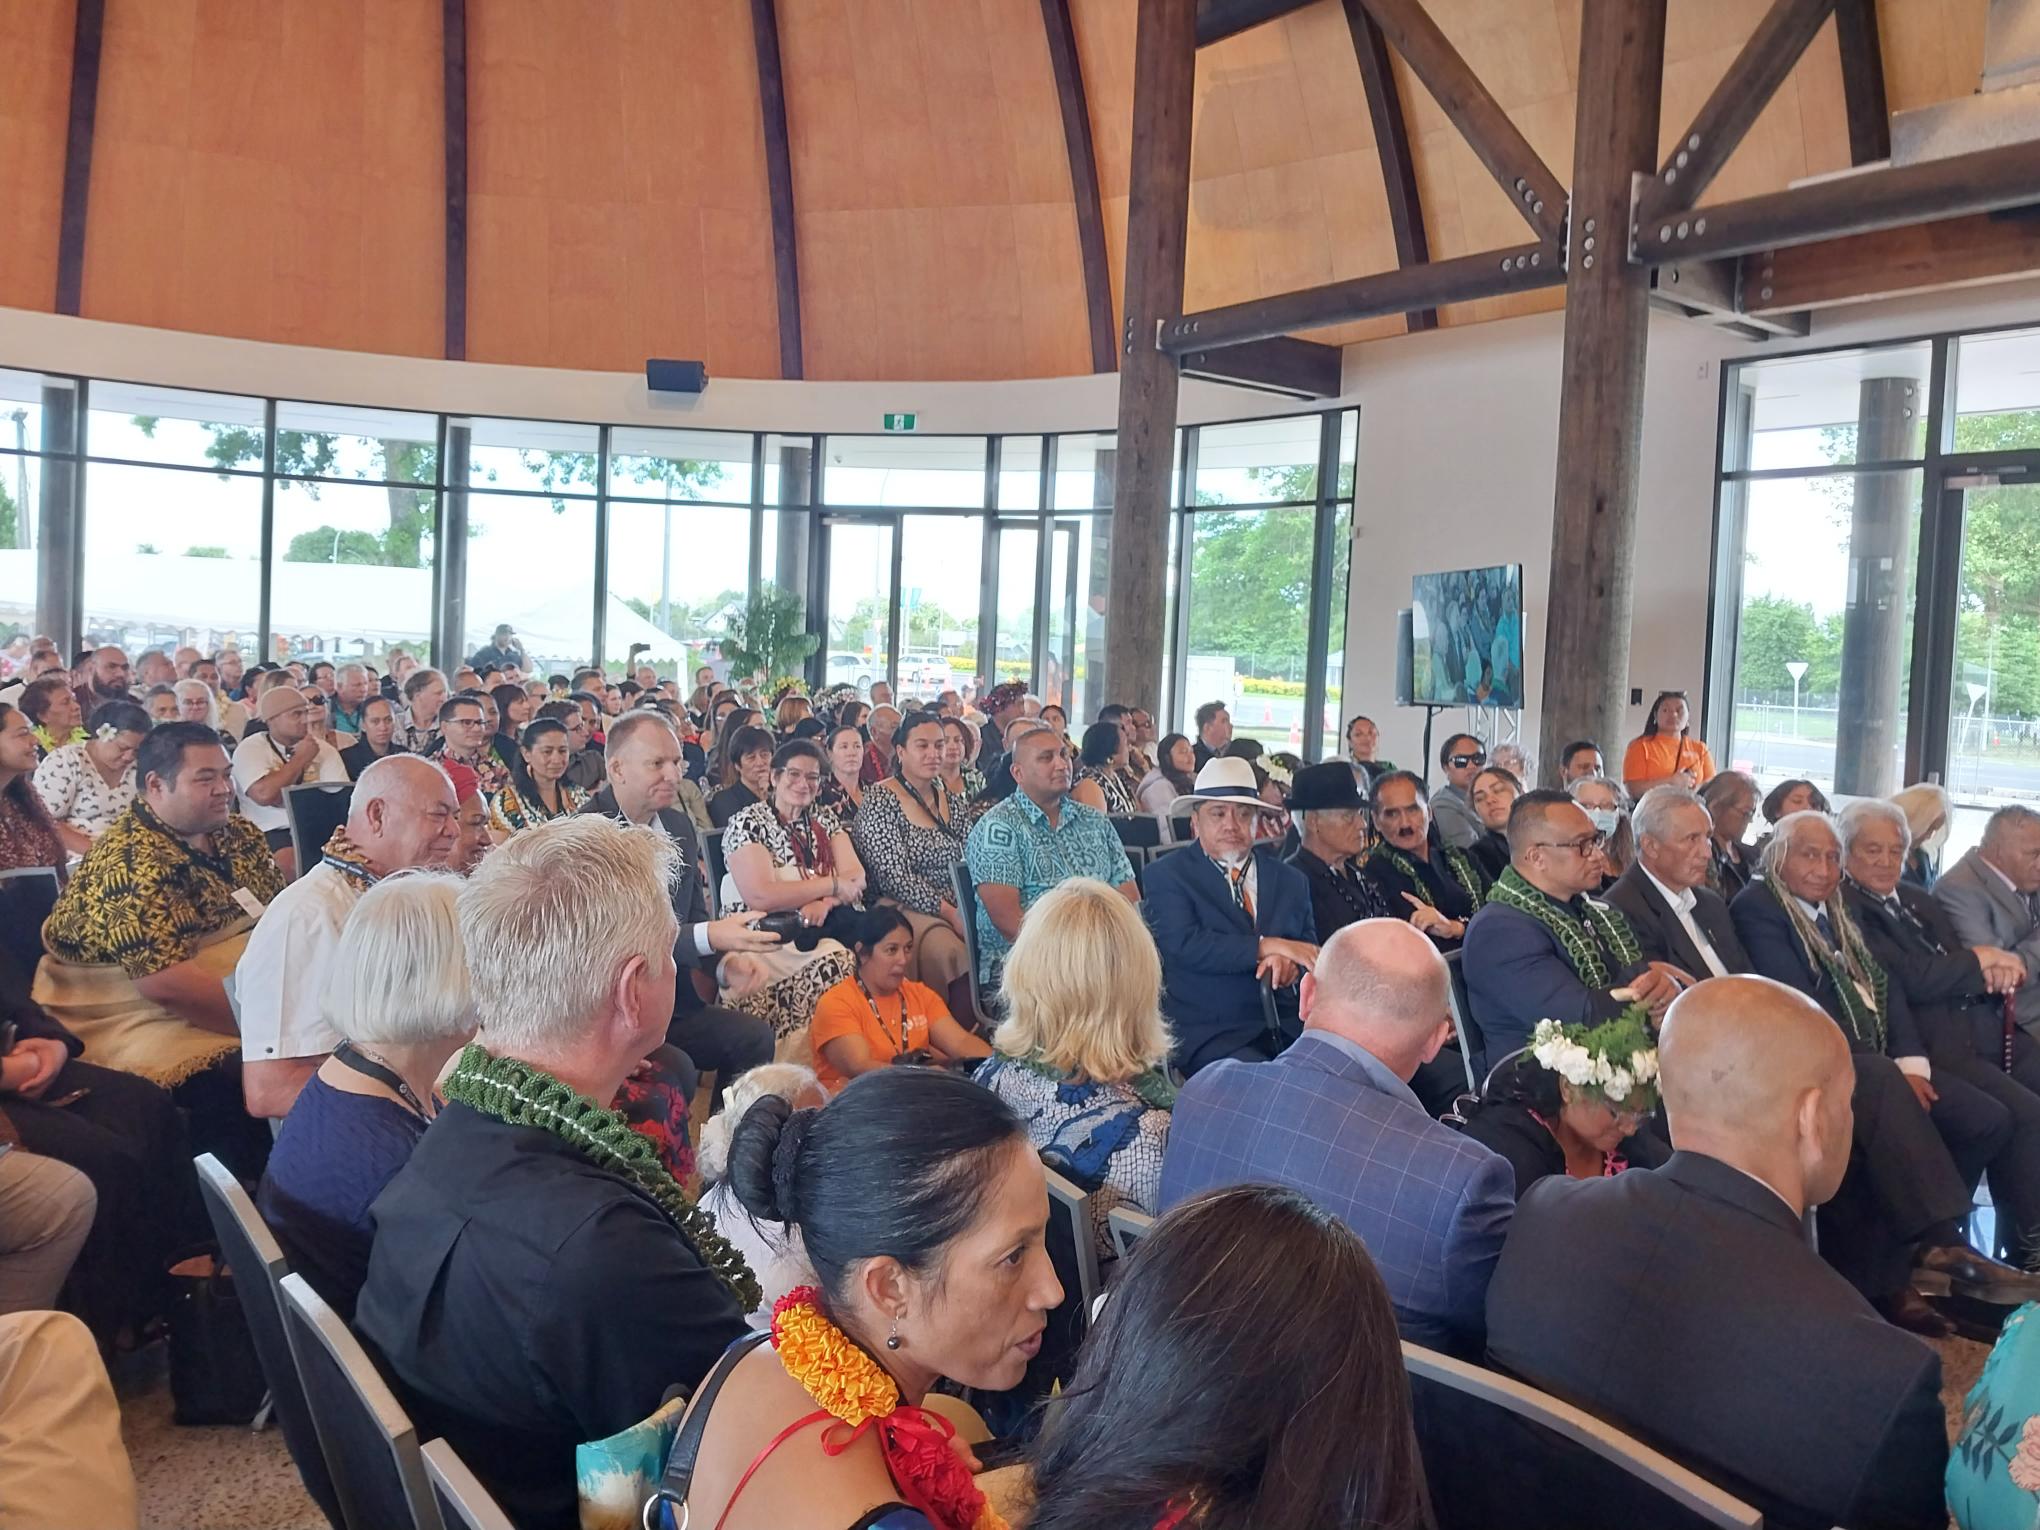 Inside the fale, full of seated guests at the opening.